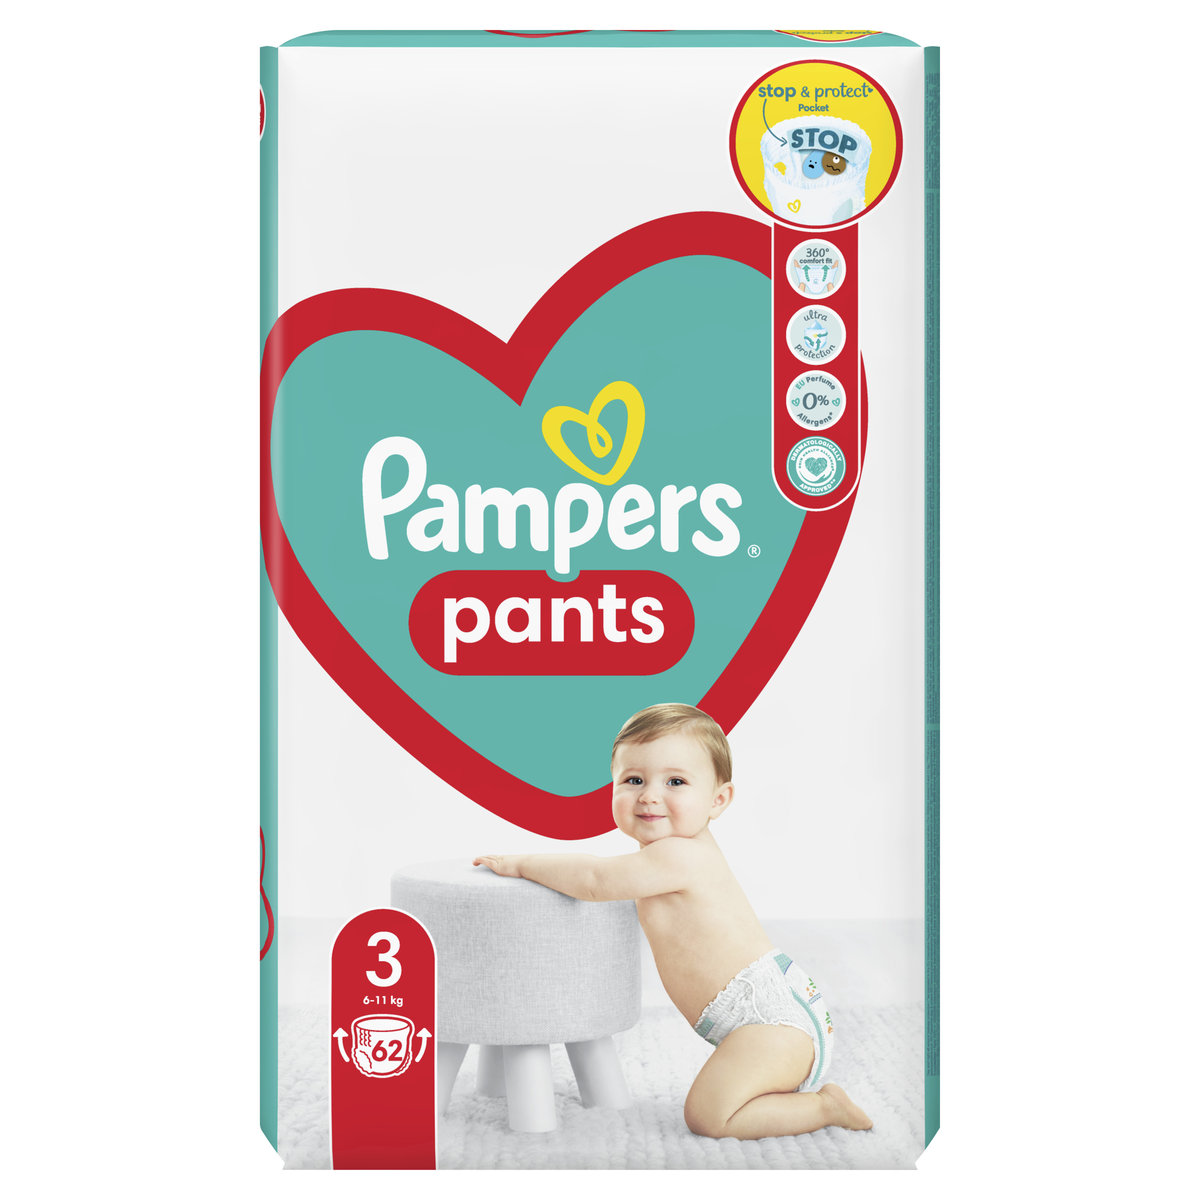 pampers fred & flo